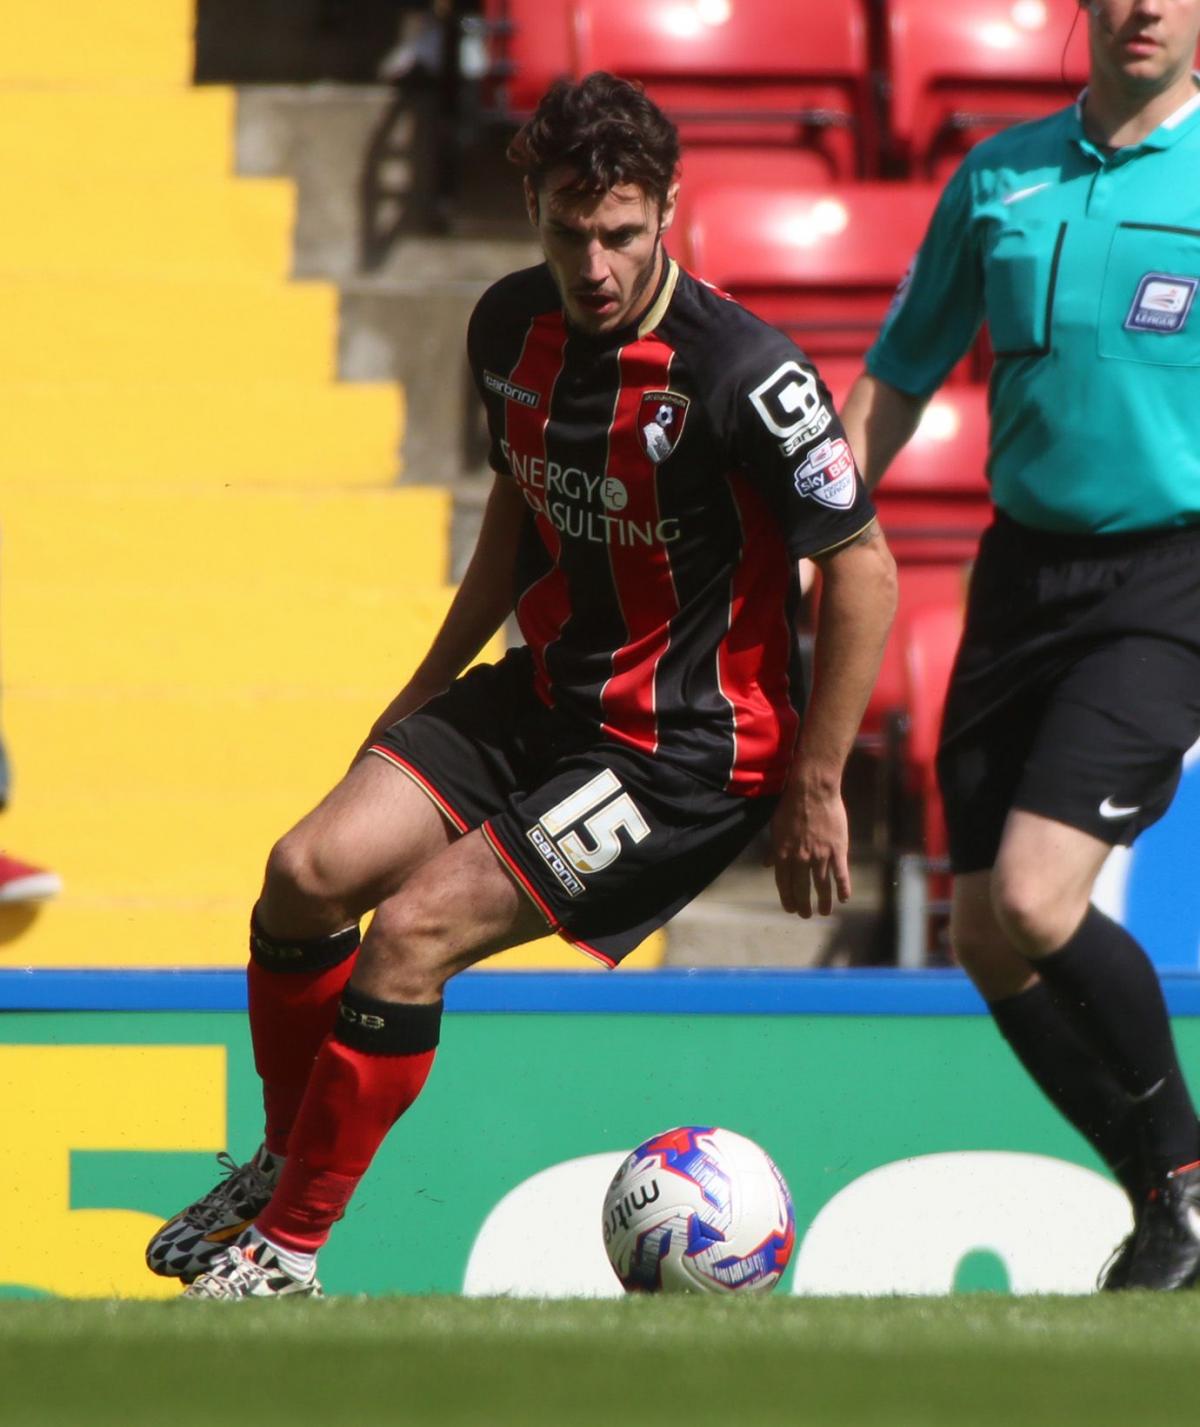 All our pictures from Blackburn Rovers v AFC Bournemouth at Ewood Park on Saturday, August 23 